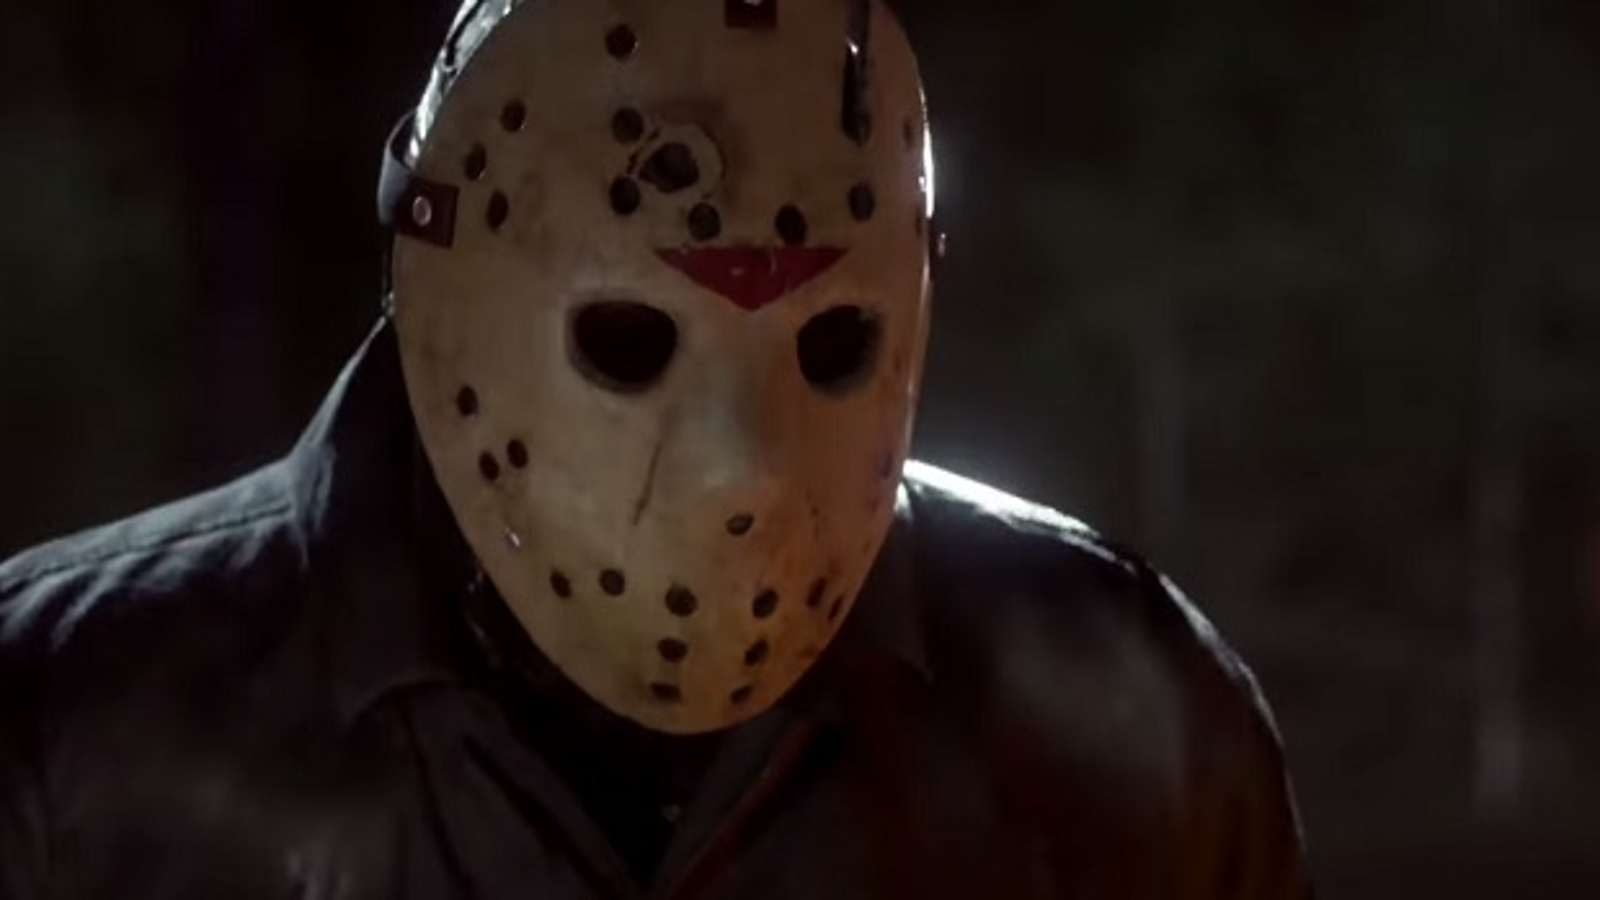 Friday the 13th early impressions